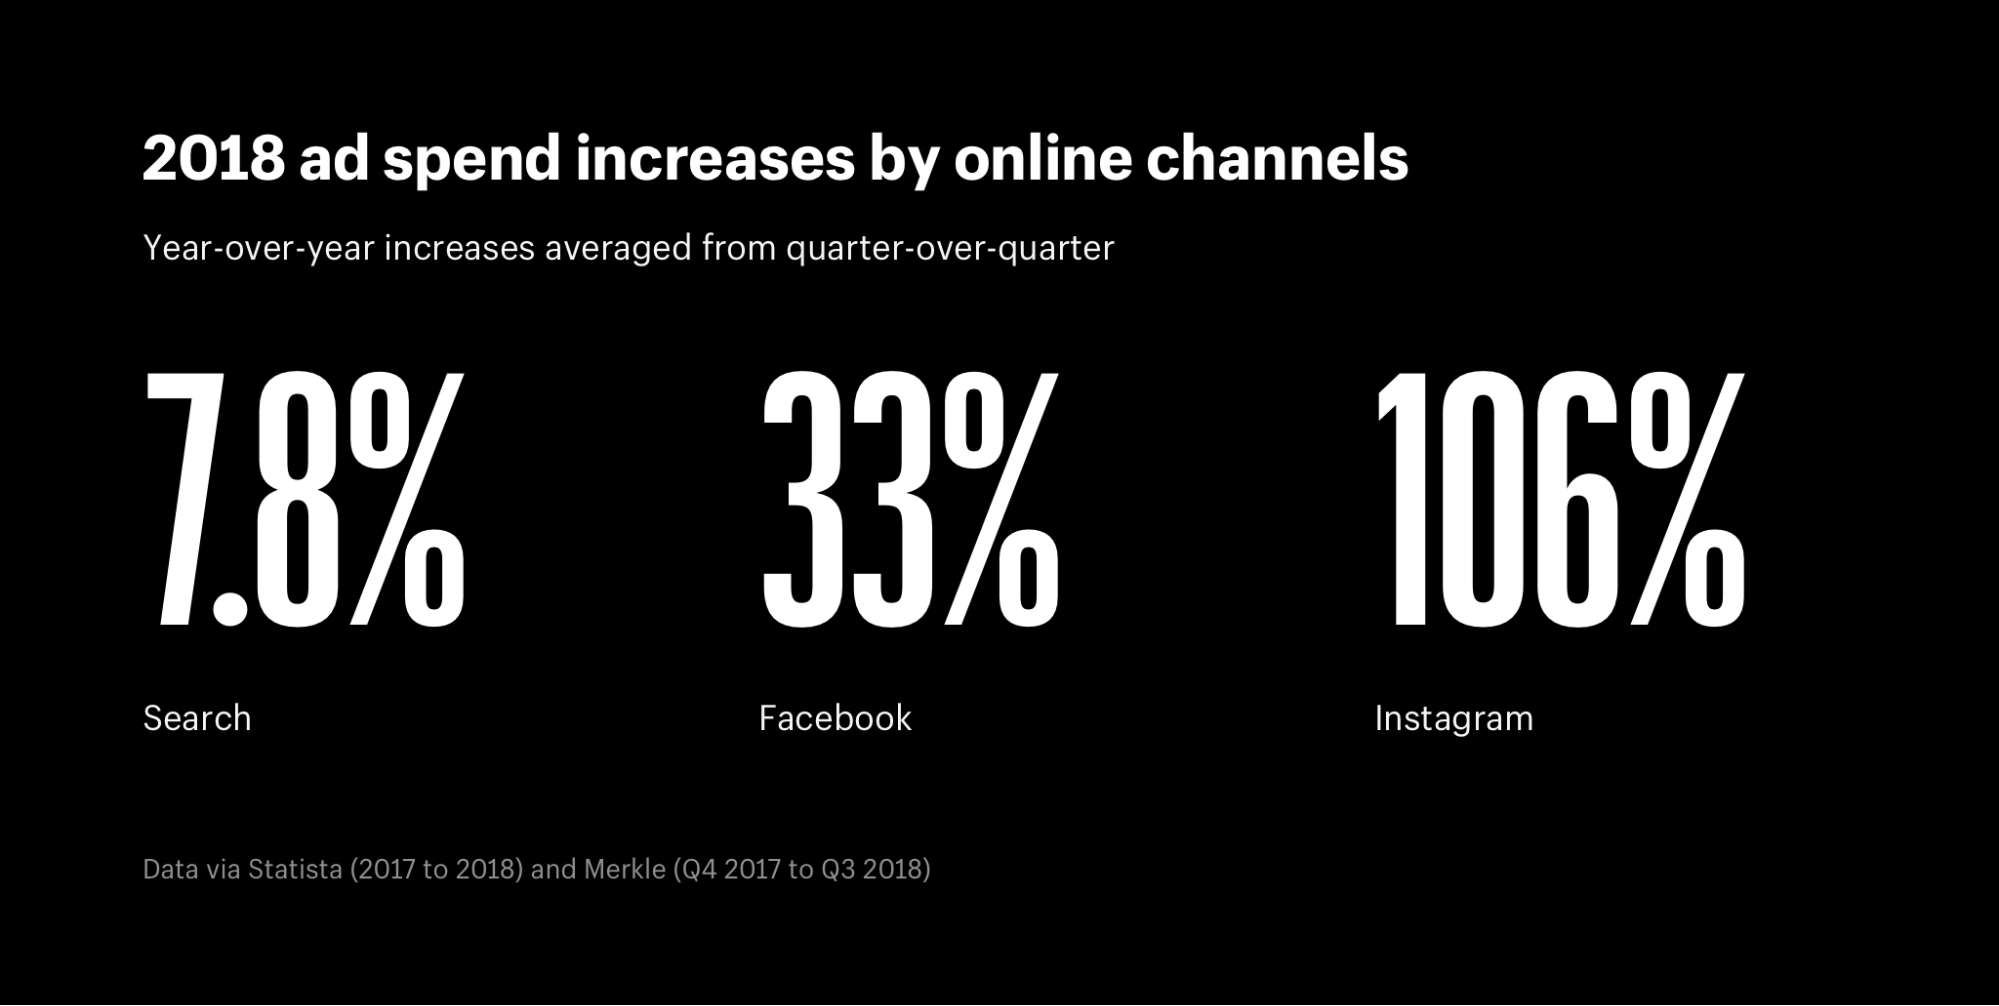 2018 ad spend increases by online acquisition channels